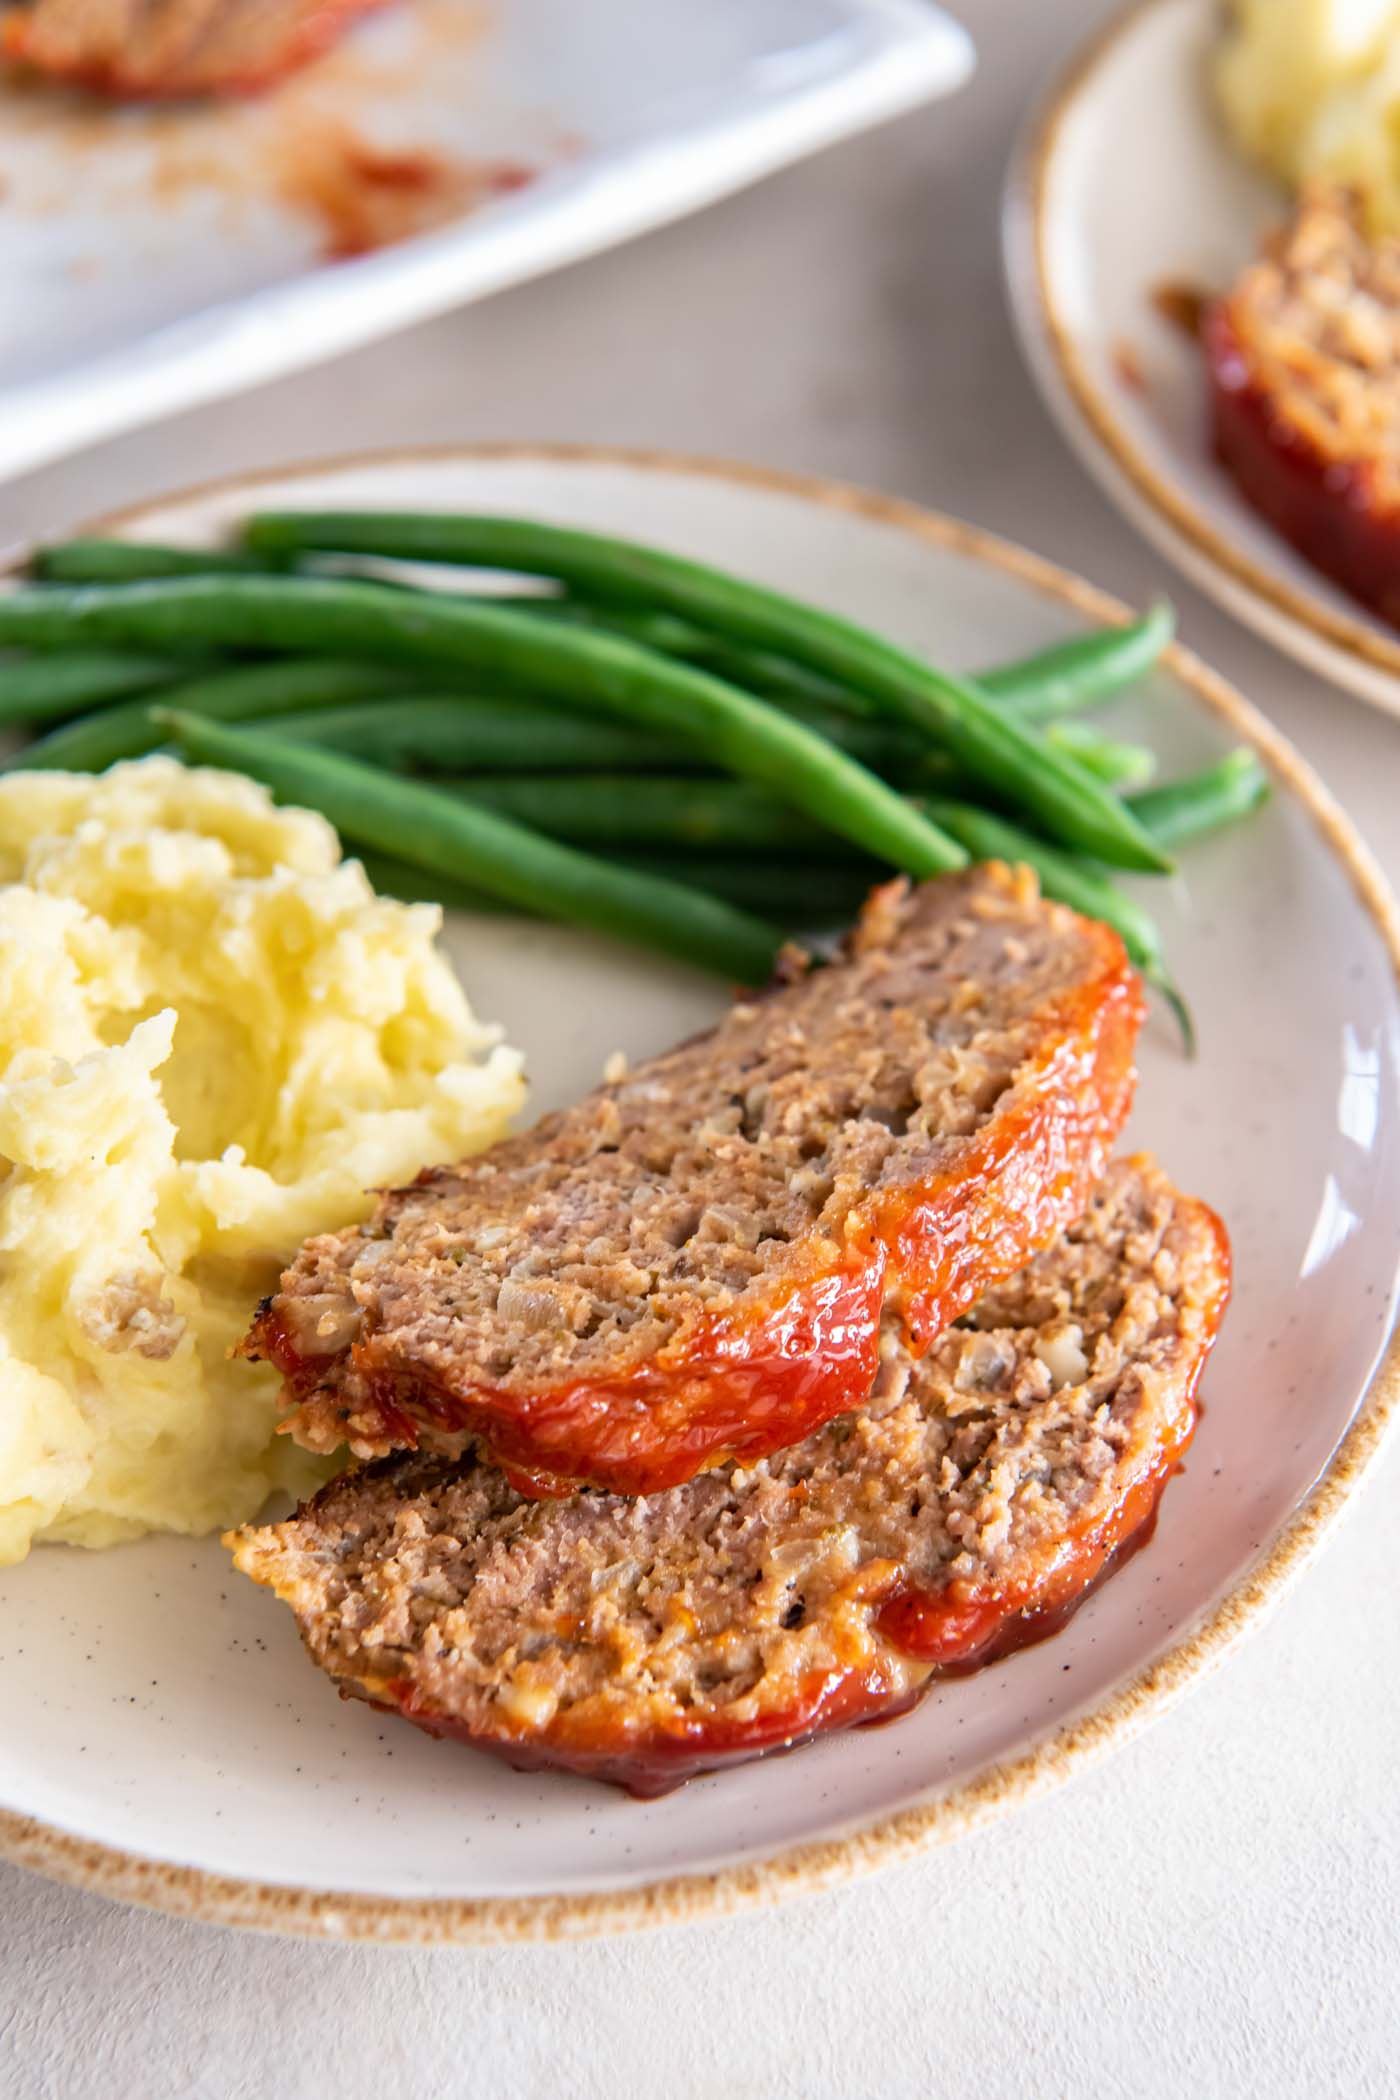 Two slices of turkey meatloaf, mashed potatoes and green beans on a plate.